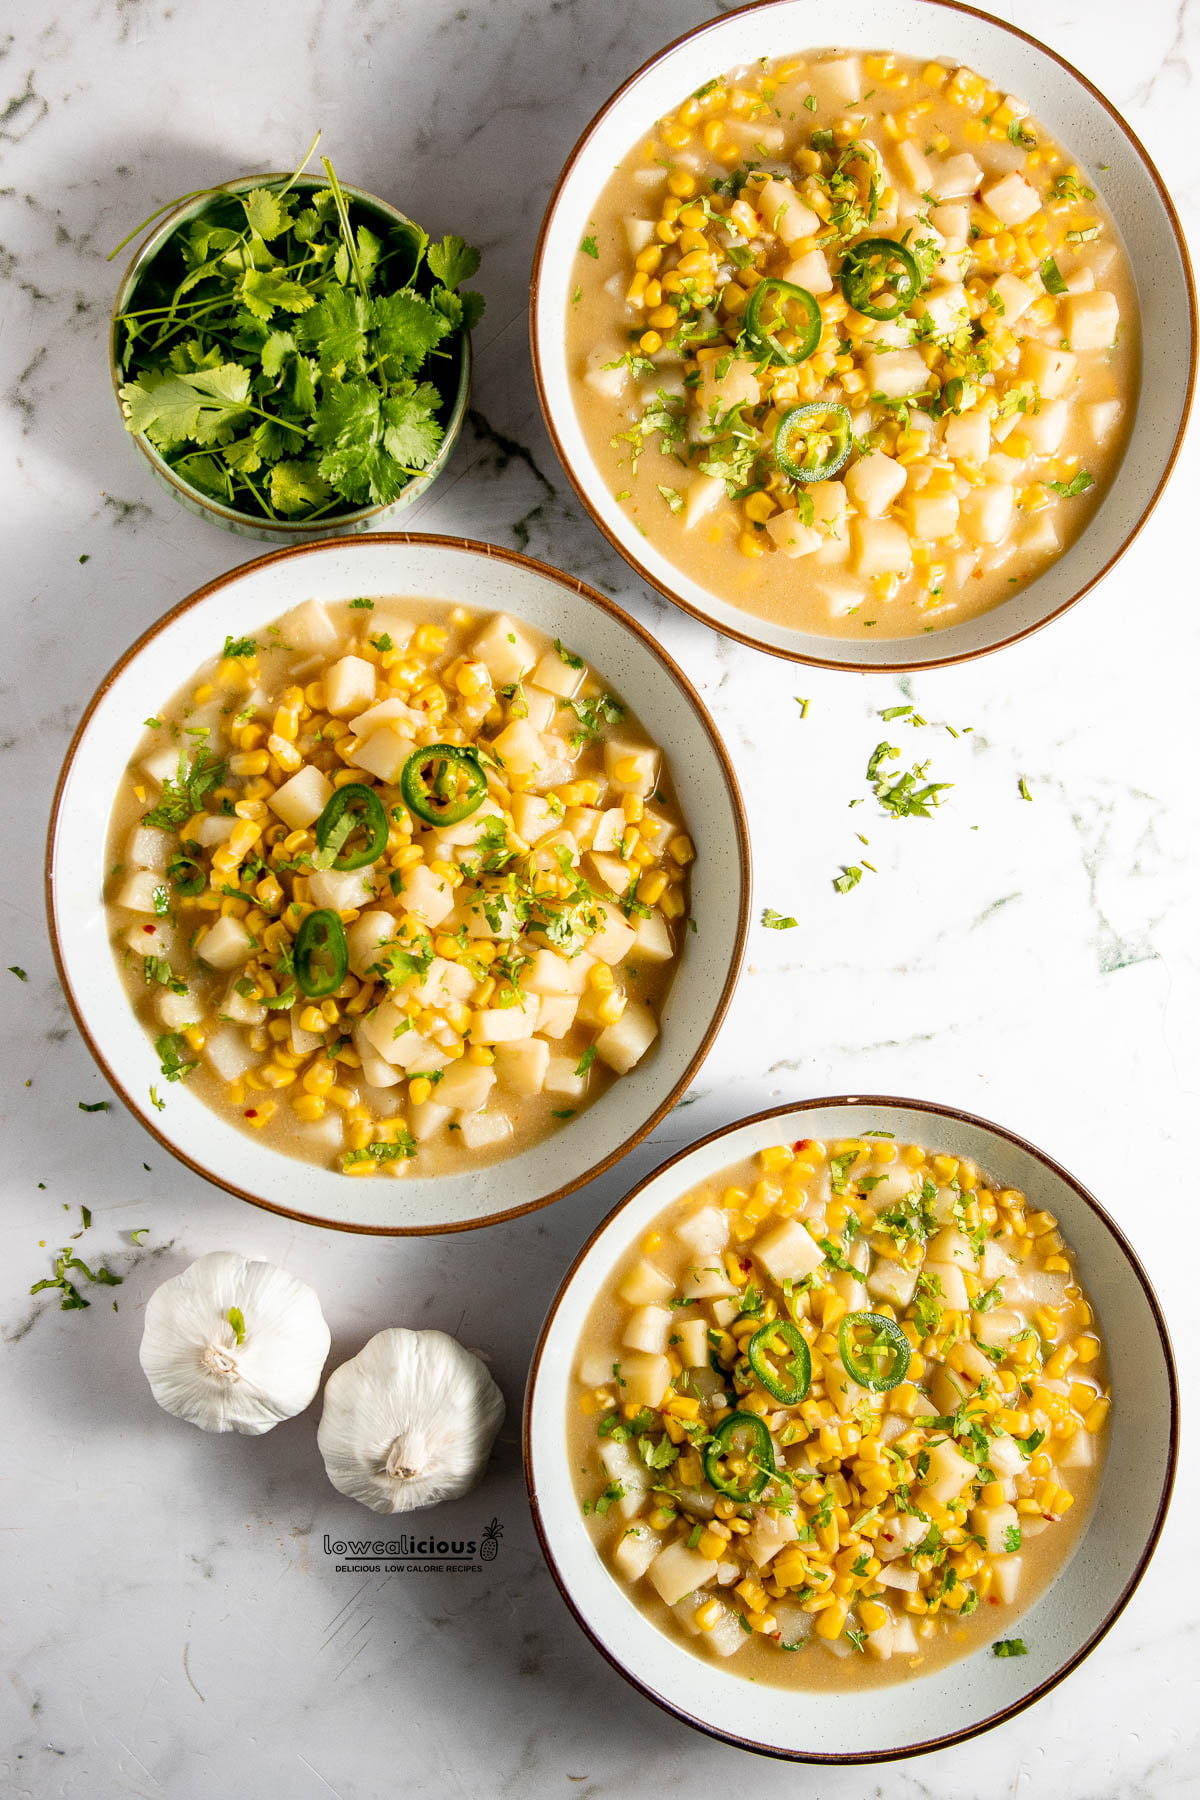 3 bowls of a cooked vegan corn chowder recipe with a small bowl of fresh cilantro and 2 heads of garlic nearby, ready to serve